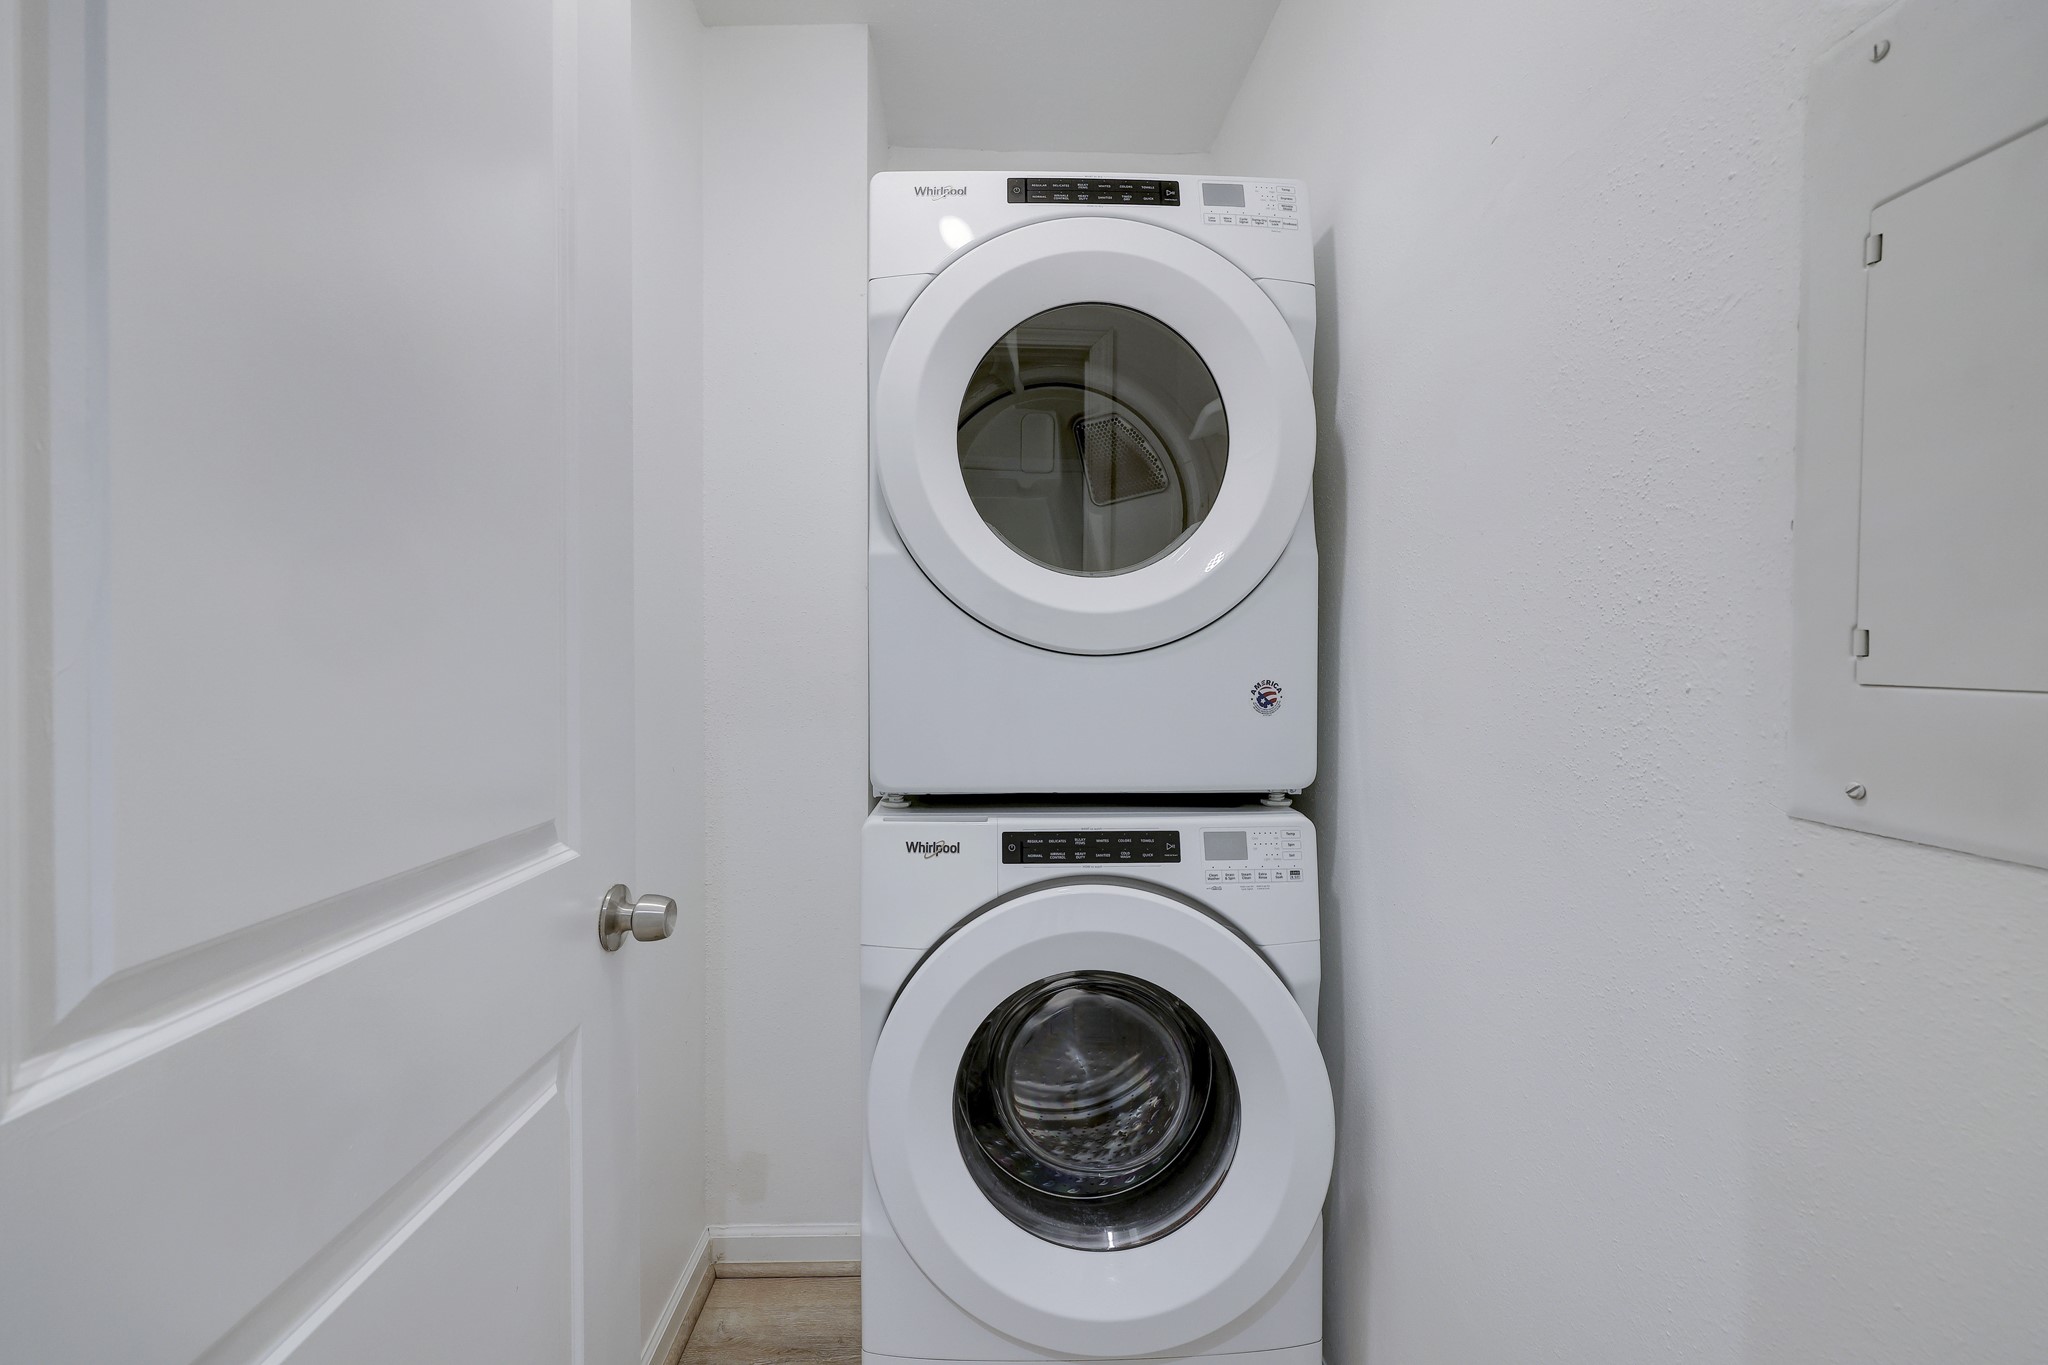 Re-designed and plumbed for full size washer and dryer and lots of room for storage and closet space